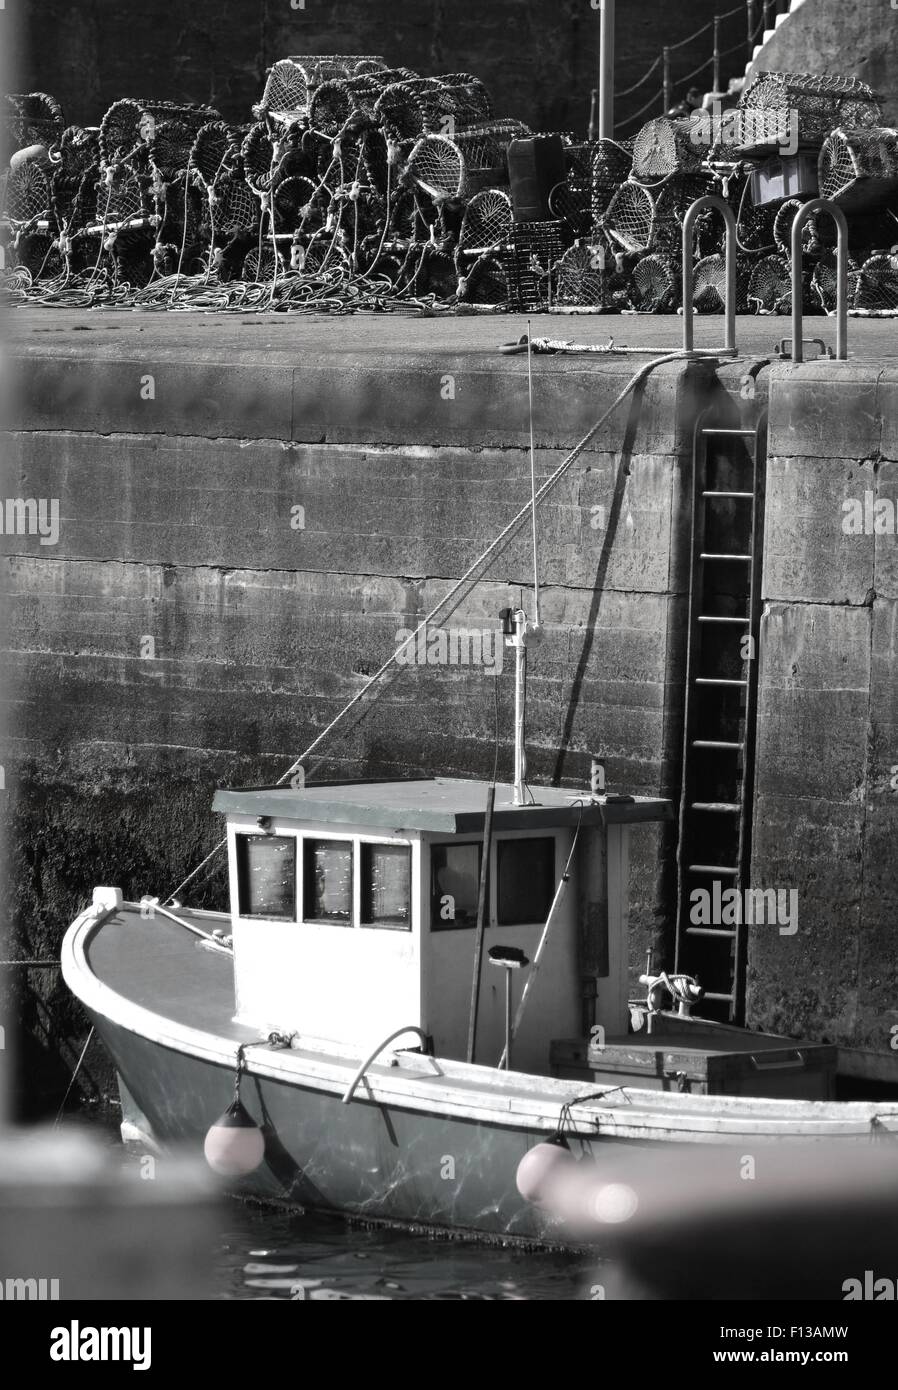 Boat in Harbour black and white Stock Photo